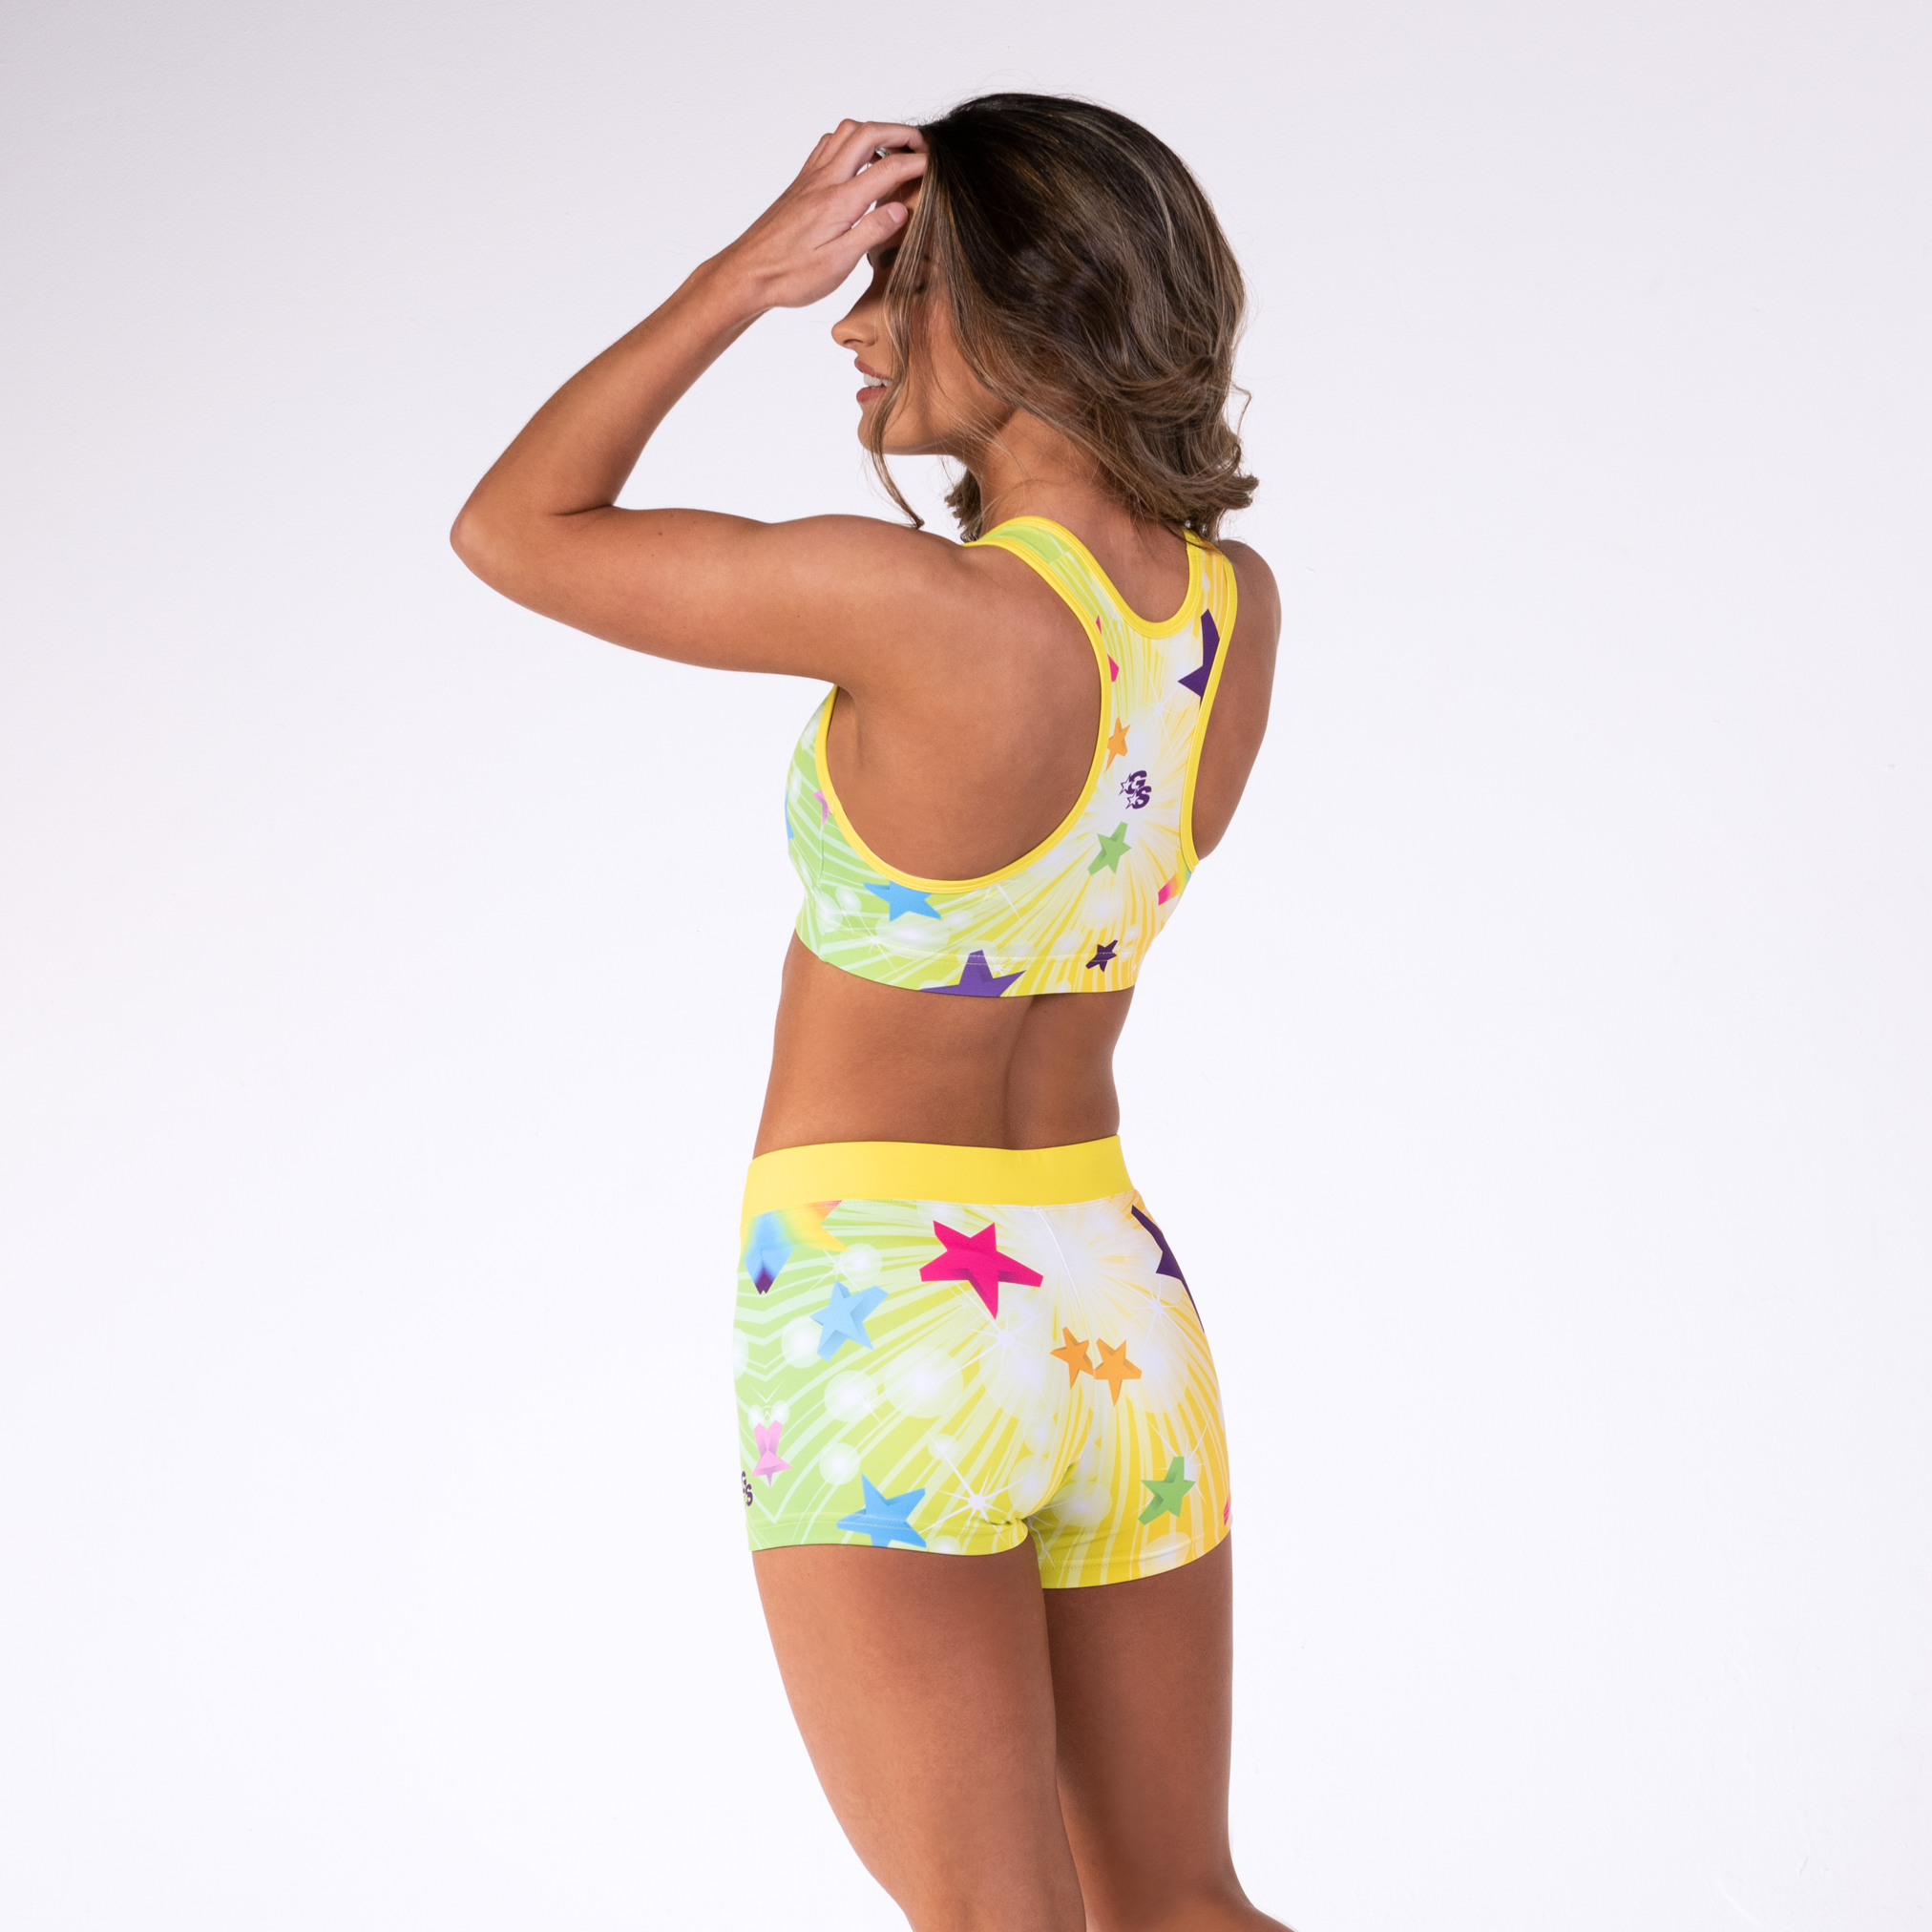 Sublimated Sports Bra and Matching Short